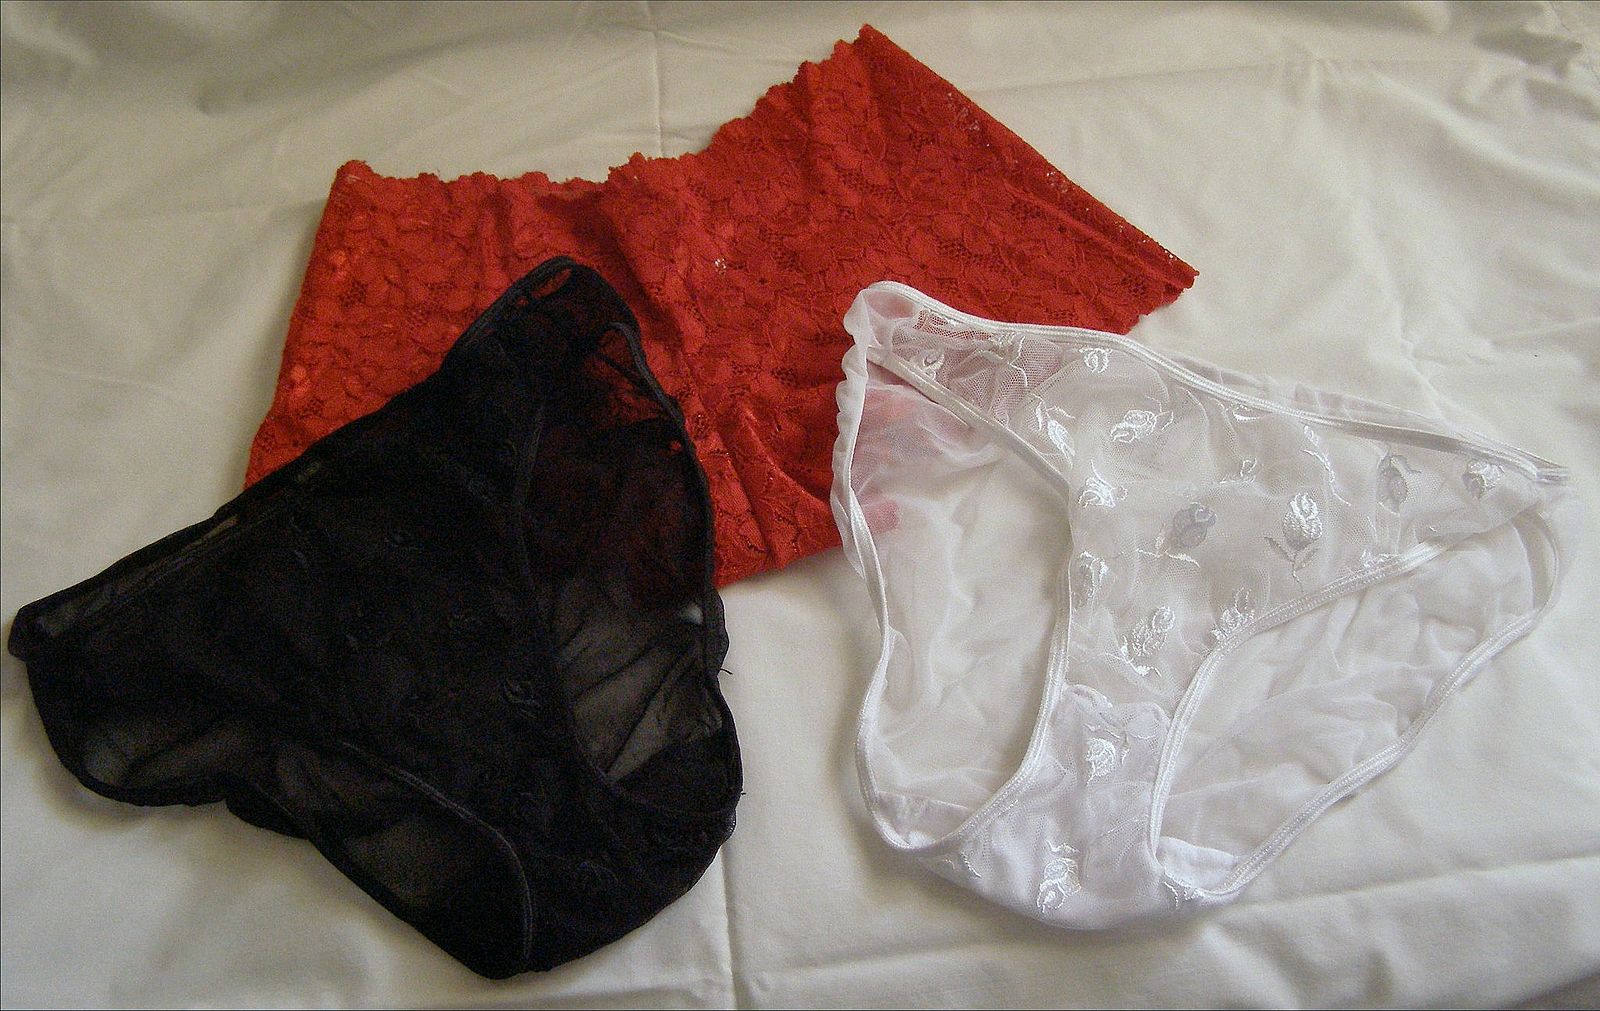 Wearing wife's lingerie wanking and sniffing her dirty knickers